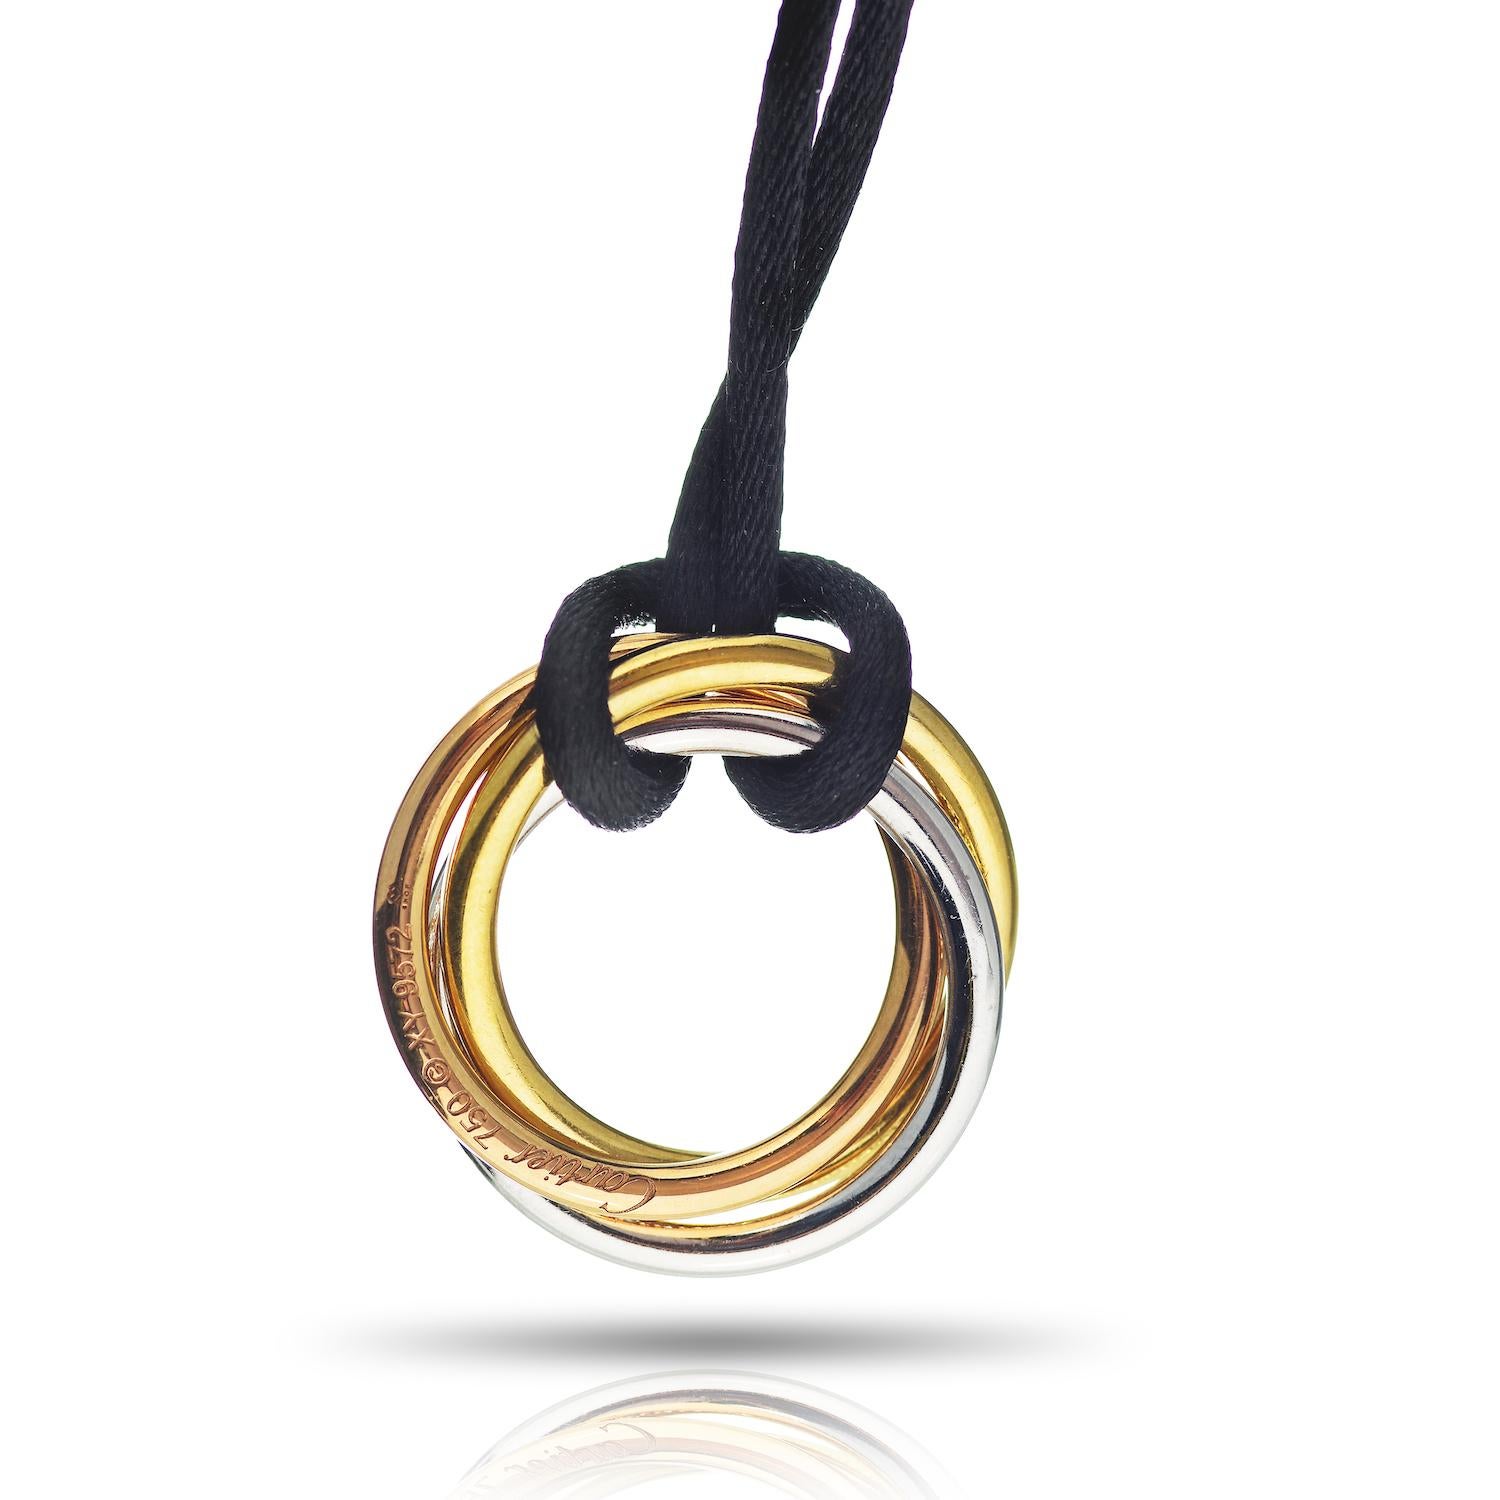 This magnificent pendant from Cartier's Trinity collection is made in 18k yellow, white, and rose gold and pave-set with 144 diamonds of an estimated 1.29 carats. Completed with an adjustable black cord. Simply stunning. Circa 2013. Cartier